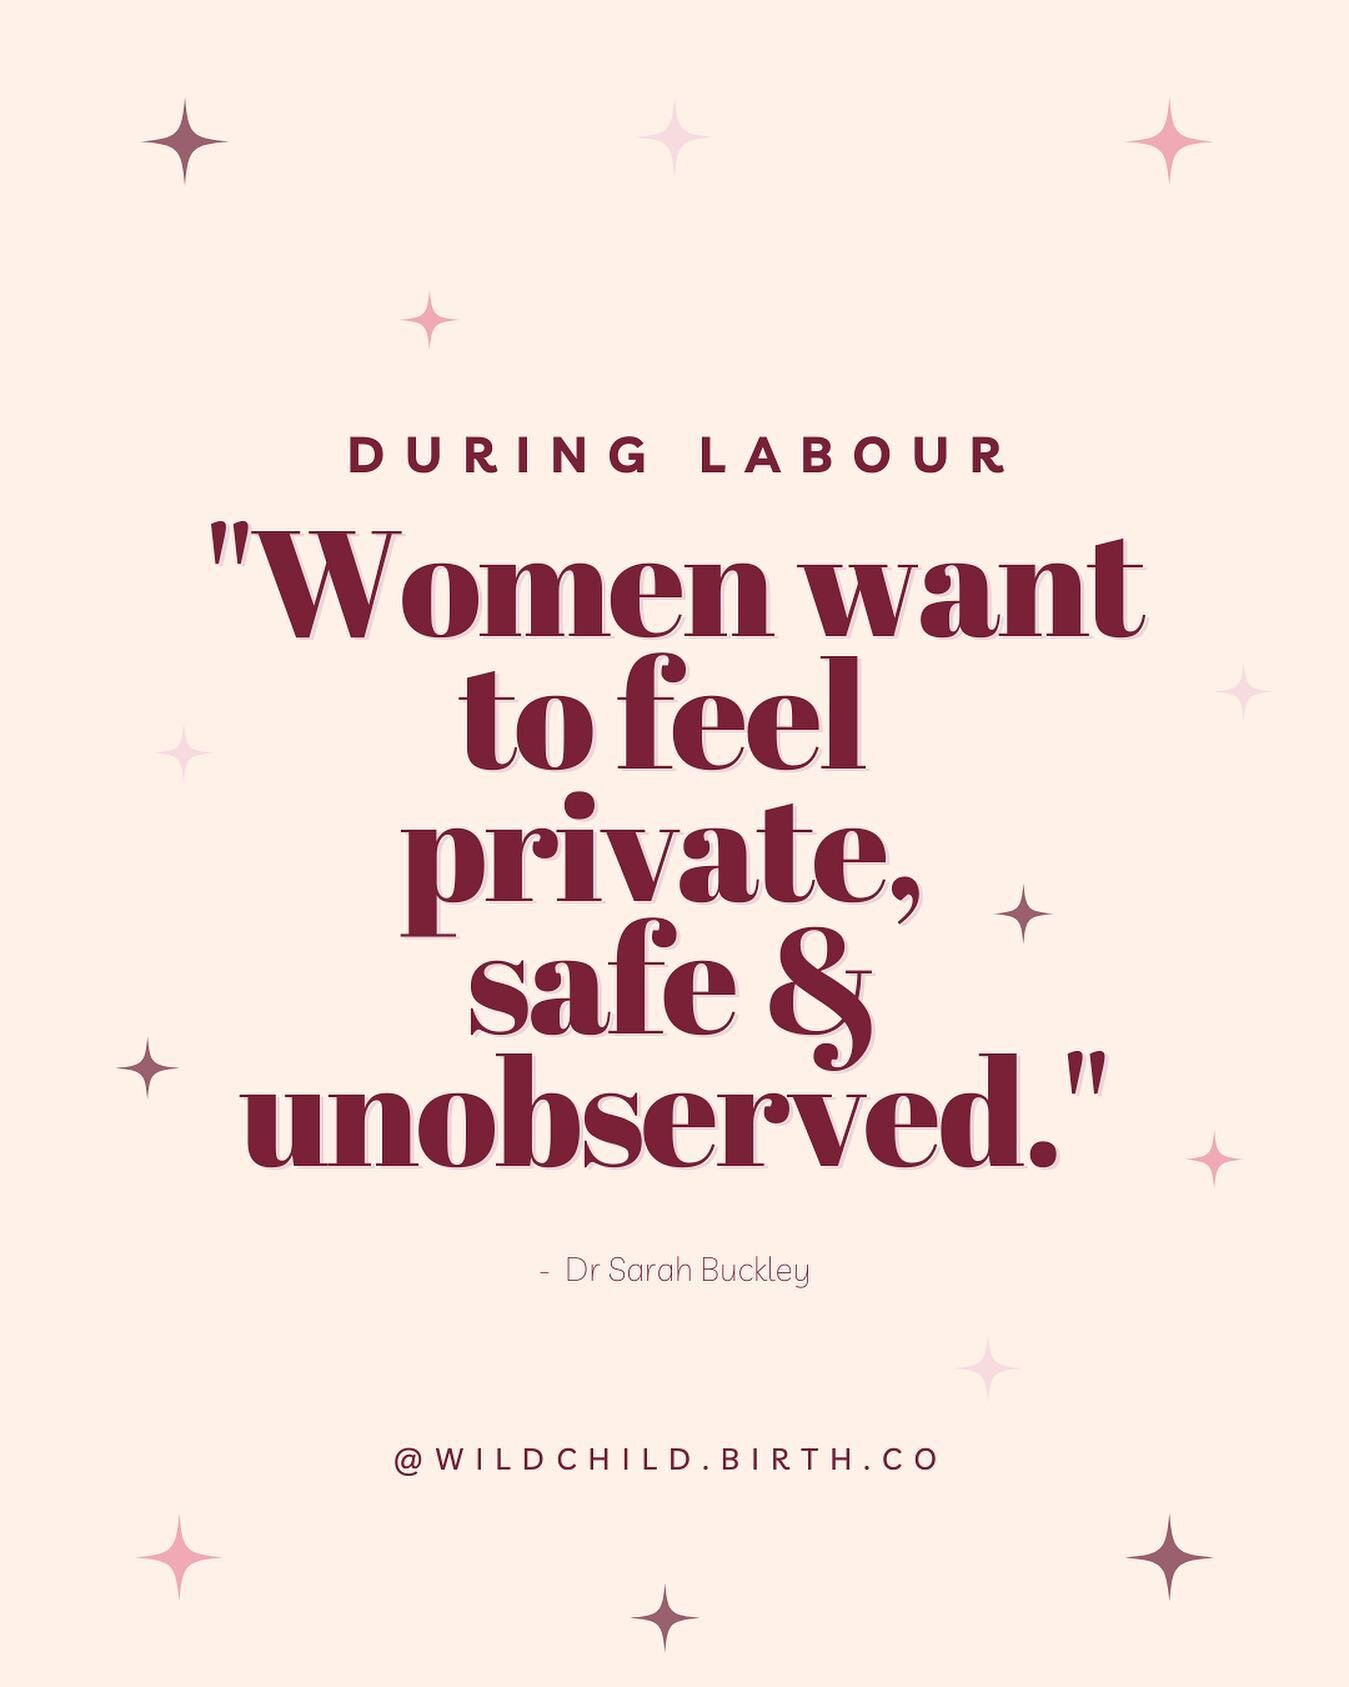 As mammals, we have the ability to start and continue with labour and it&rsquo;s process when we feel private, safe and unobserved.

Similarly, we have the ability to stop labour if we feel our sense of safety is under threat. 

It&rsquo;s easy to fe